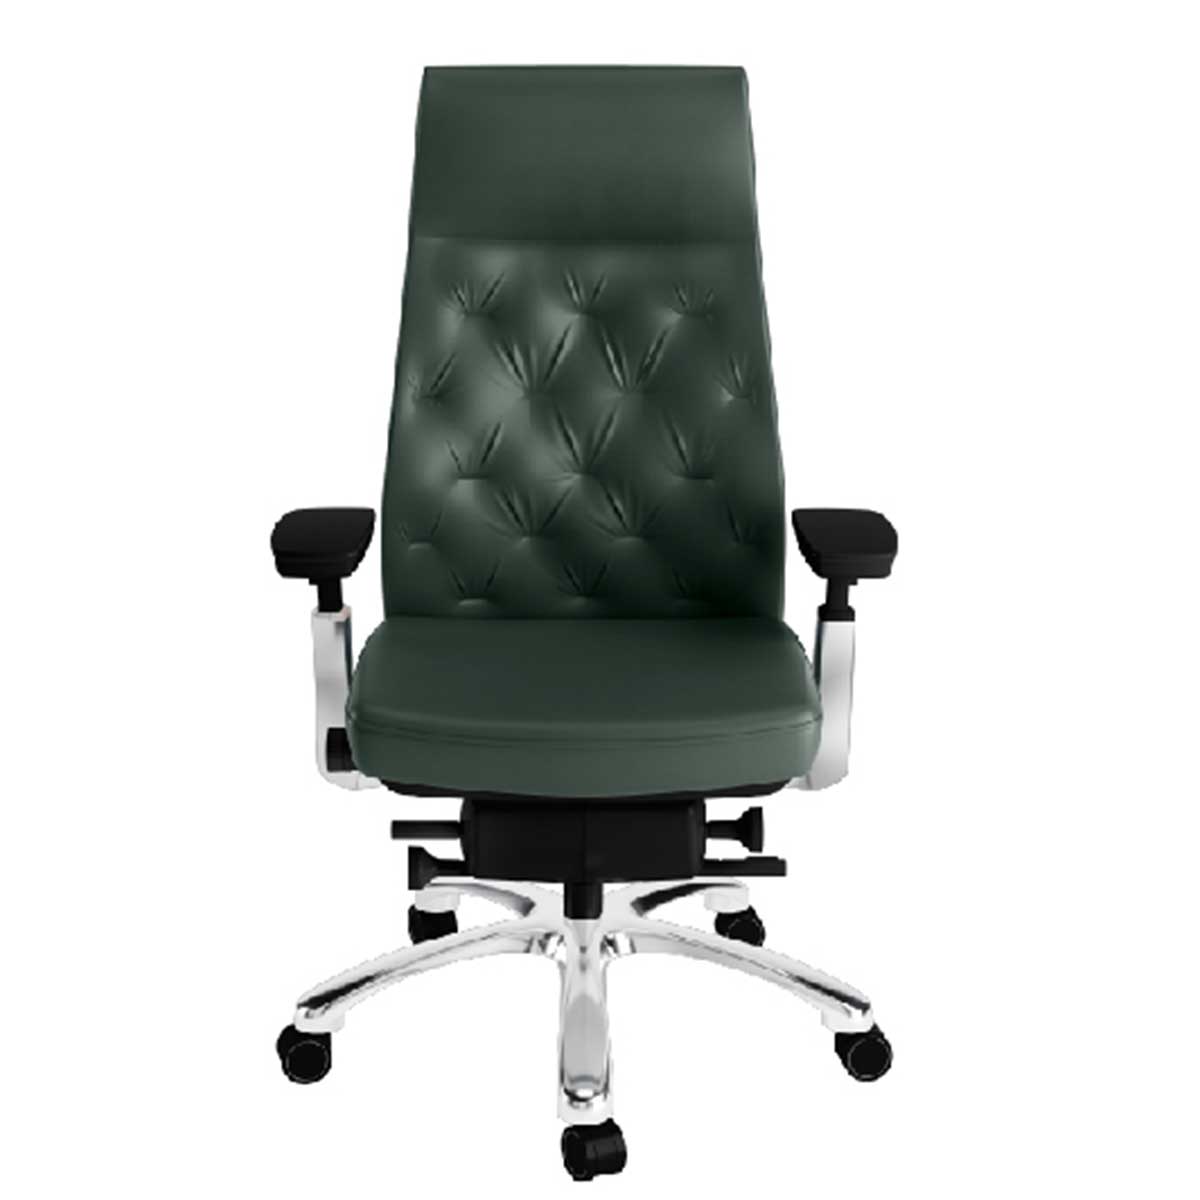 Director & Chairman-Chair Manufacturers, Suppliers in Noida Extension